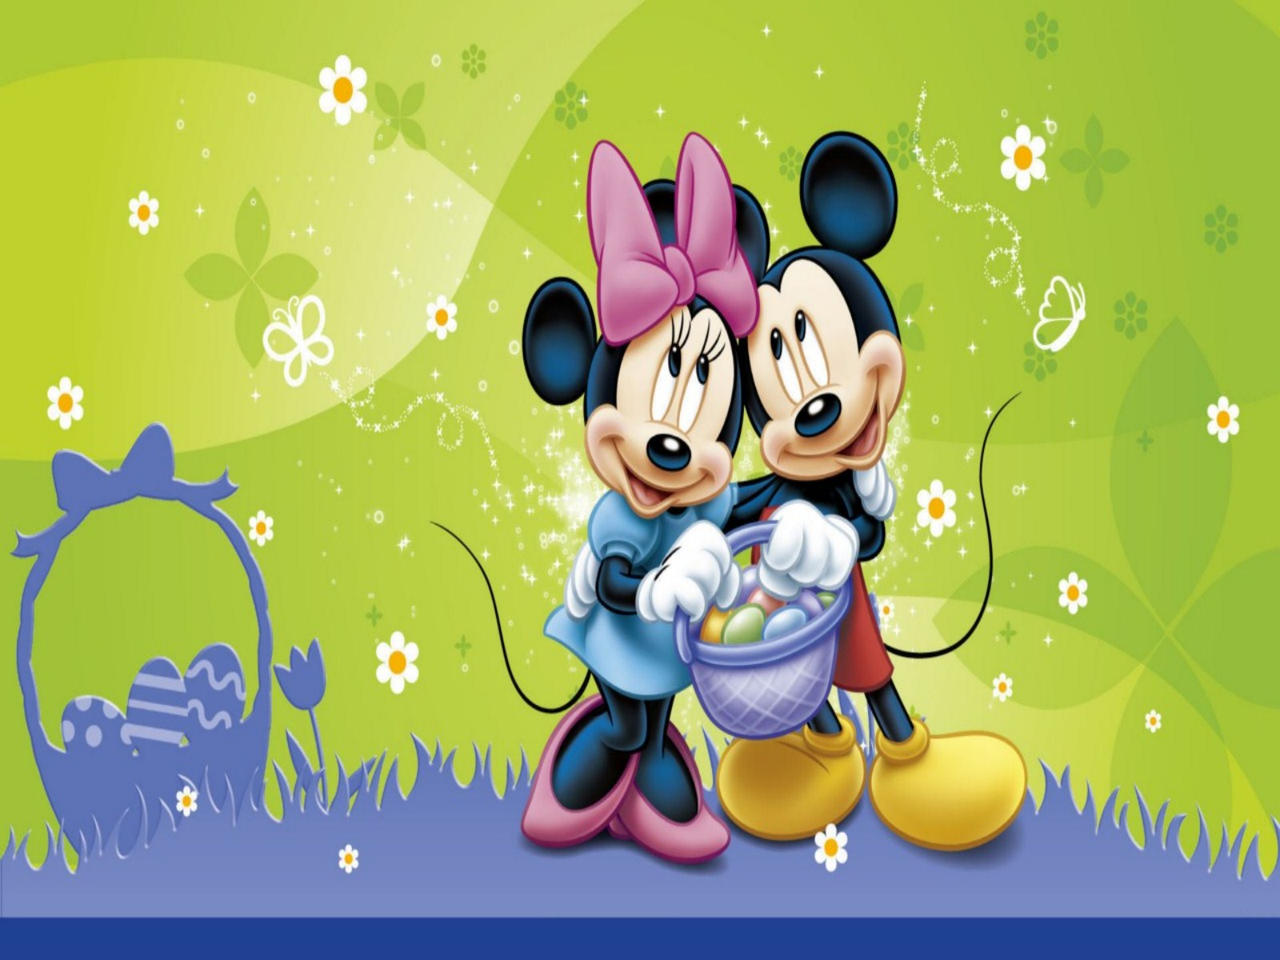 Mickey and Minnie Easter Wallpaper by polskienagrania1990 on DeviantArt